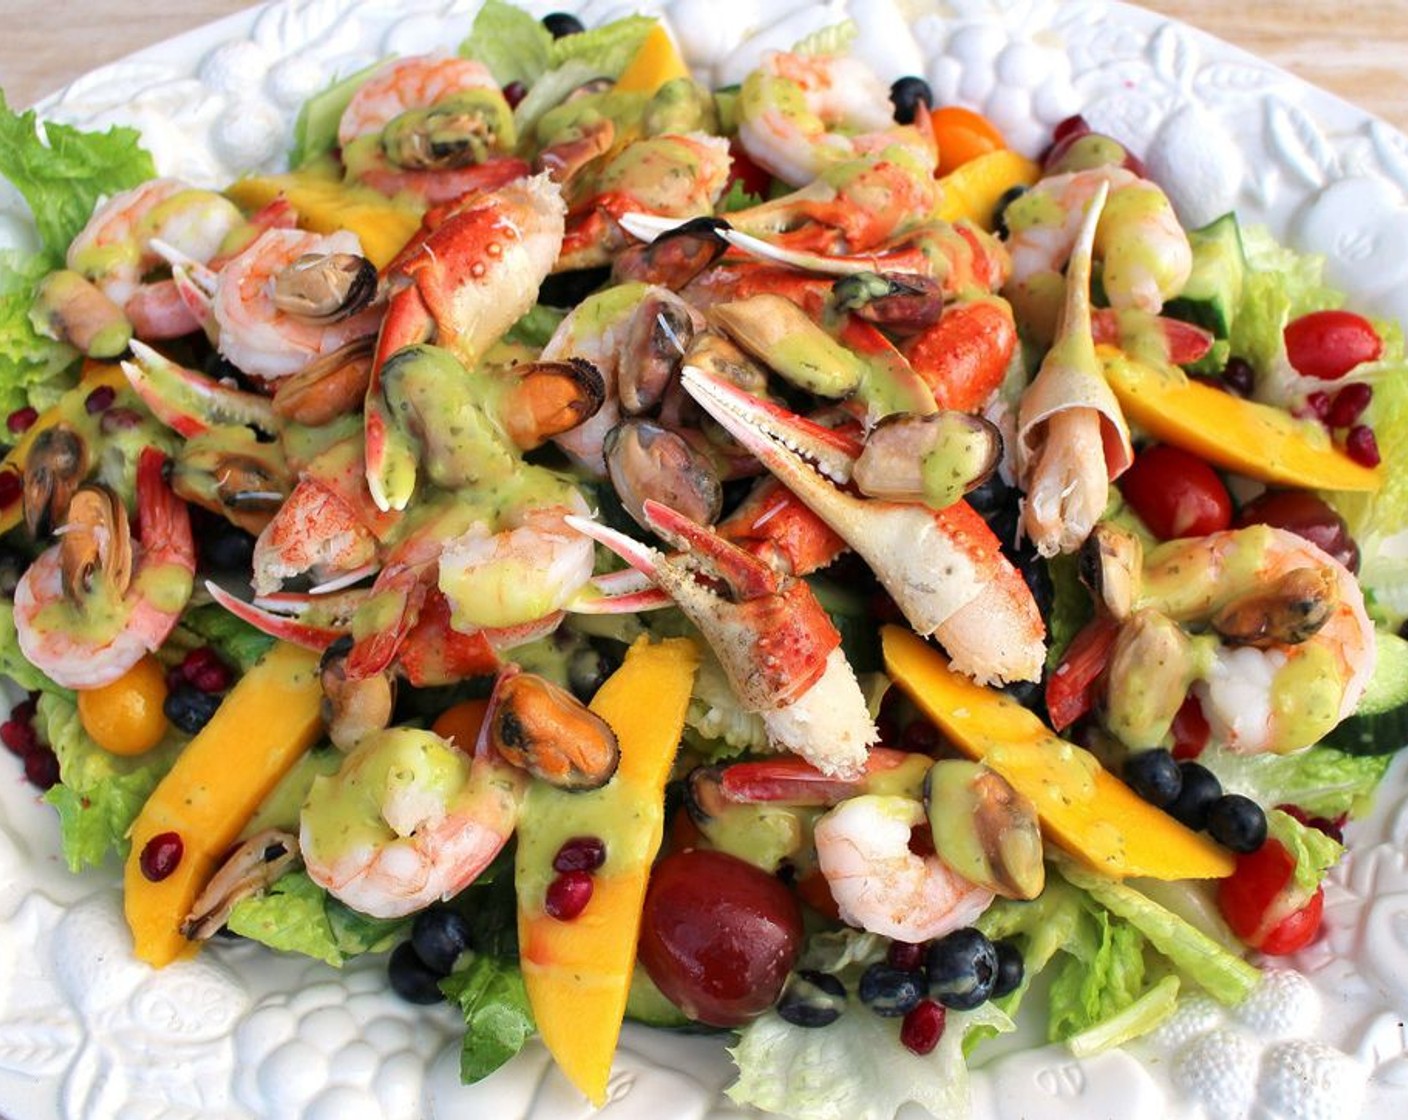 step 9 Top with Fresh Mixed Berries (to taste) and seafood, drizzle generously with Vinaigrette (to taste). Serve and enjoy!